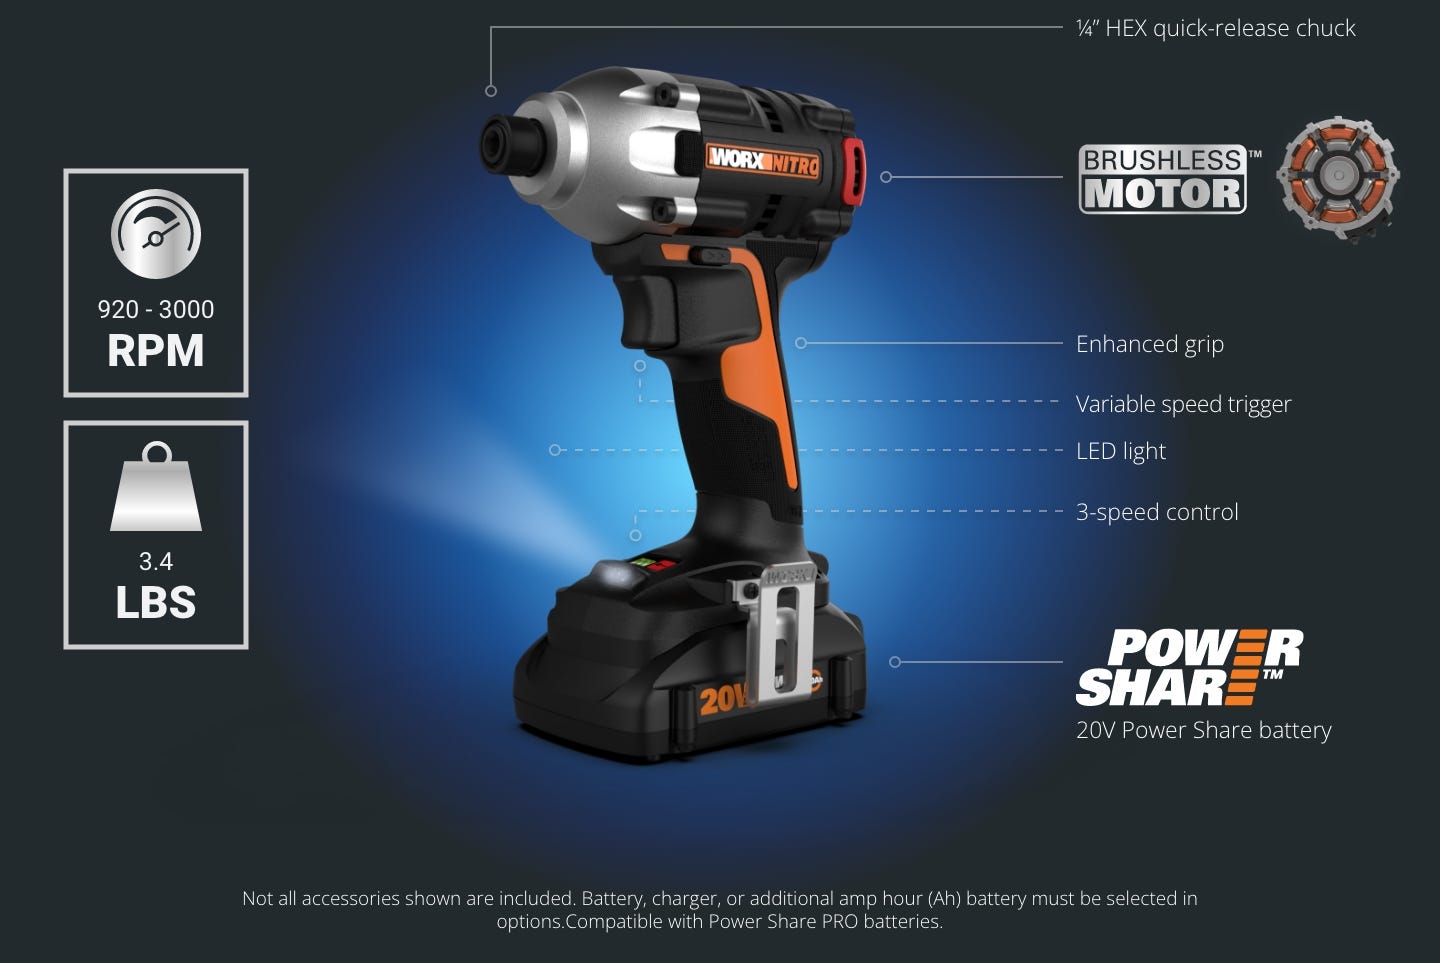 Nitro impact driver featuring: 1/4 inch hex quick-release chuck, brushless motor, enhanced grip, variable speed trigger, LED light, 3-speed control, 20V Power Share battery, not all accessories shown are included.